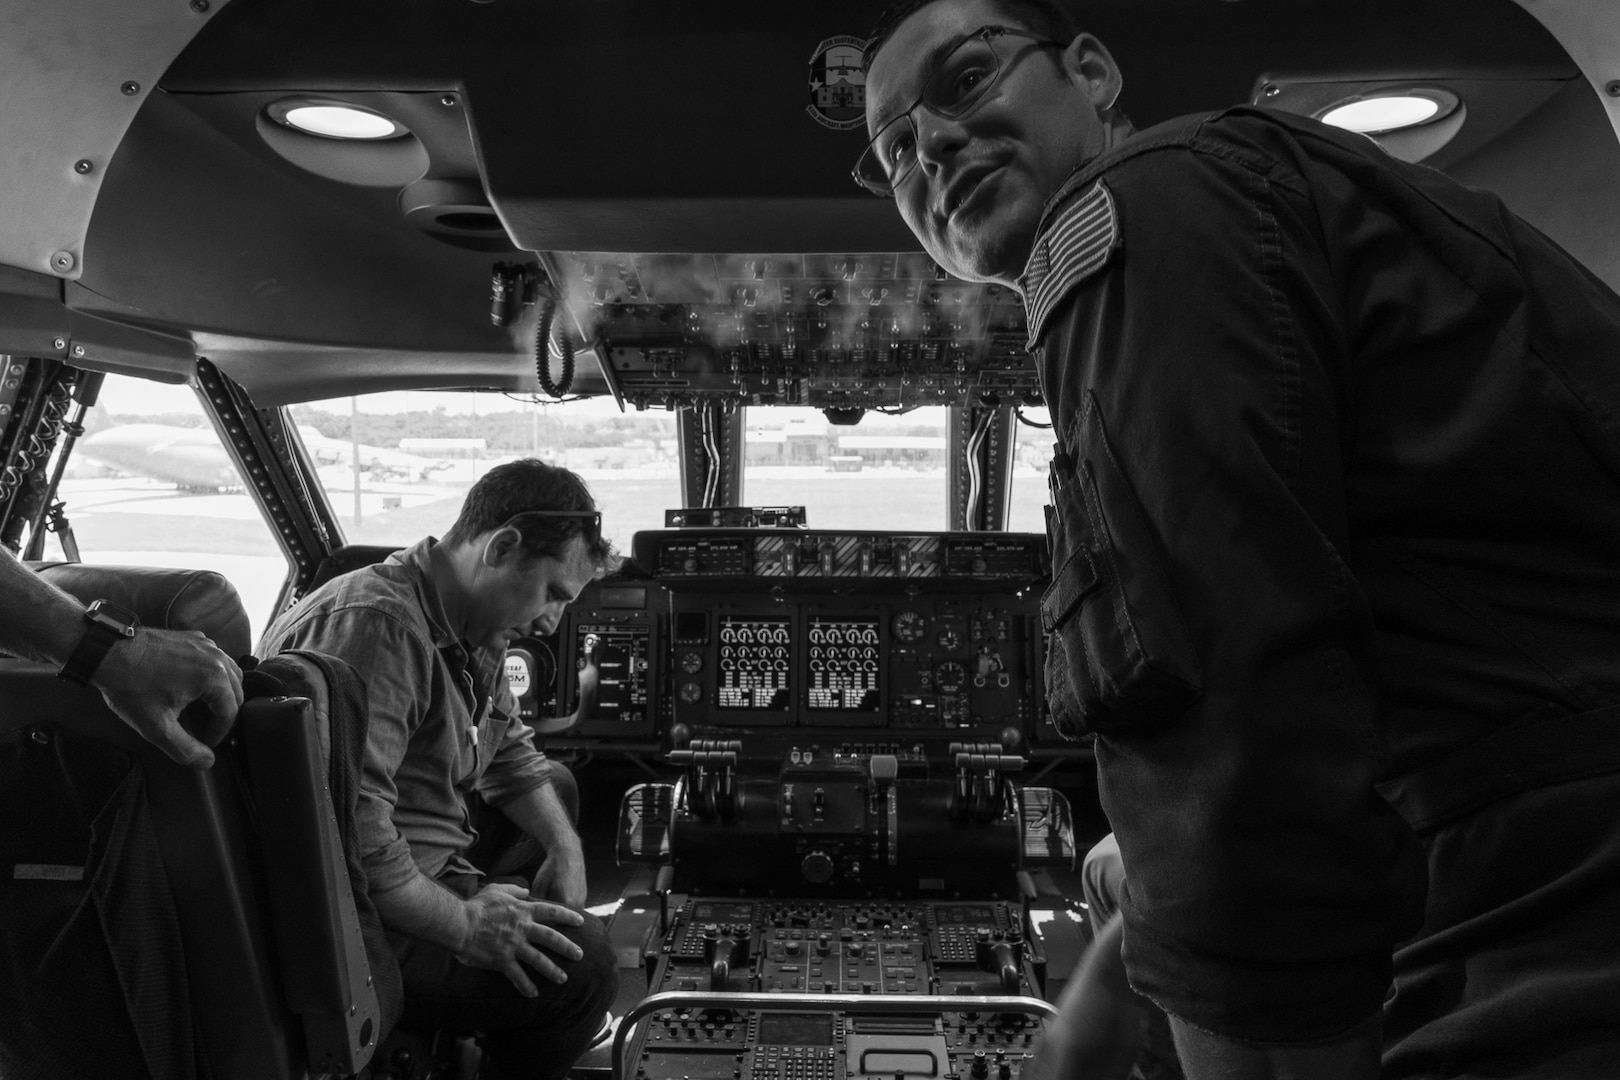 Director Oliver Butler with the Arts in the Armed Forces, looks over the controls in the cockpit of a C-5M Super Galaxy during a tour of the 433rd Airlift Wing, Joint Base San Antonio-Lackland June 28. The AITAF visited San Antonio to perform a reading of “True West,” to San Antonio’s local military personnel, veterans, and their families. The Arts in the Armed Forces, Inc. is a non-profit based in Brooklyn, New York. Its mission brings high-quality arts programming to active-duty and Reserve service members, veterans, military support staff, and their families around the world free of charge.